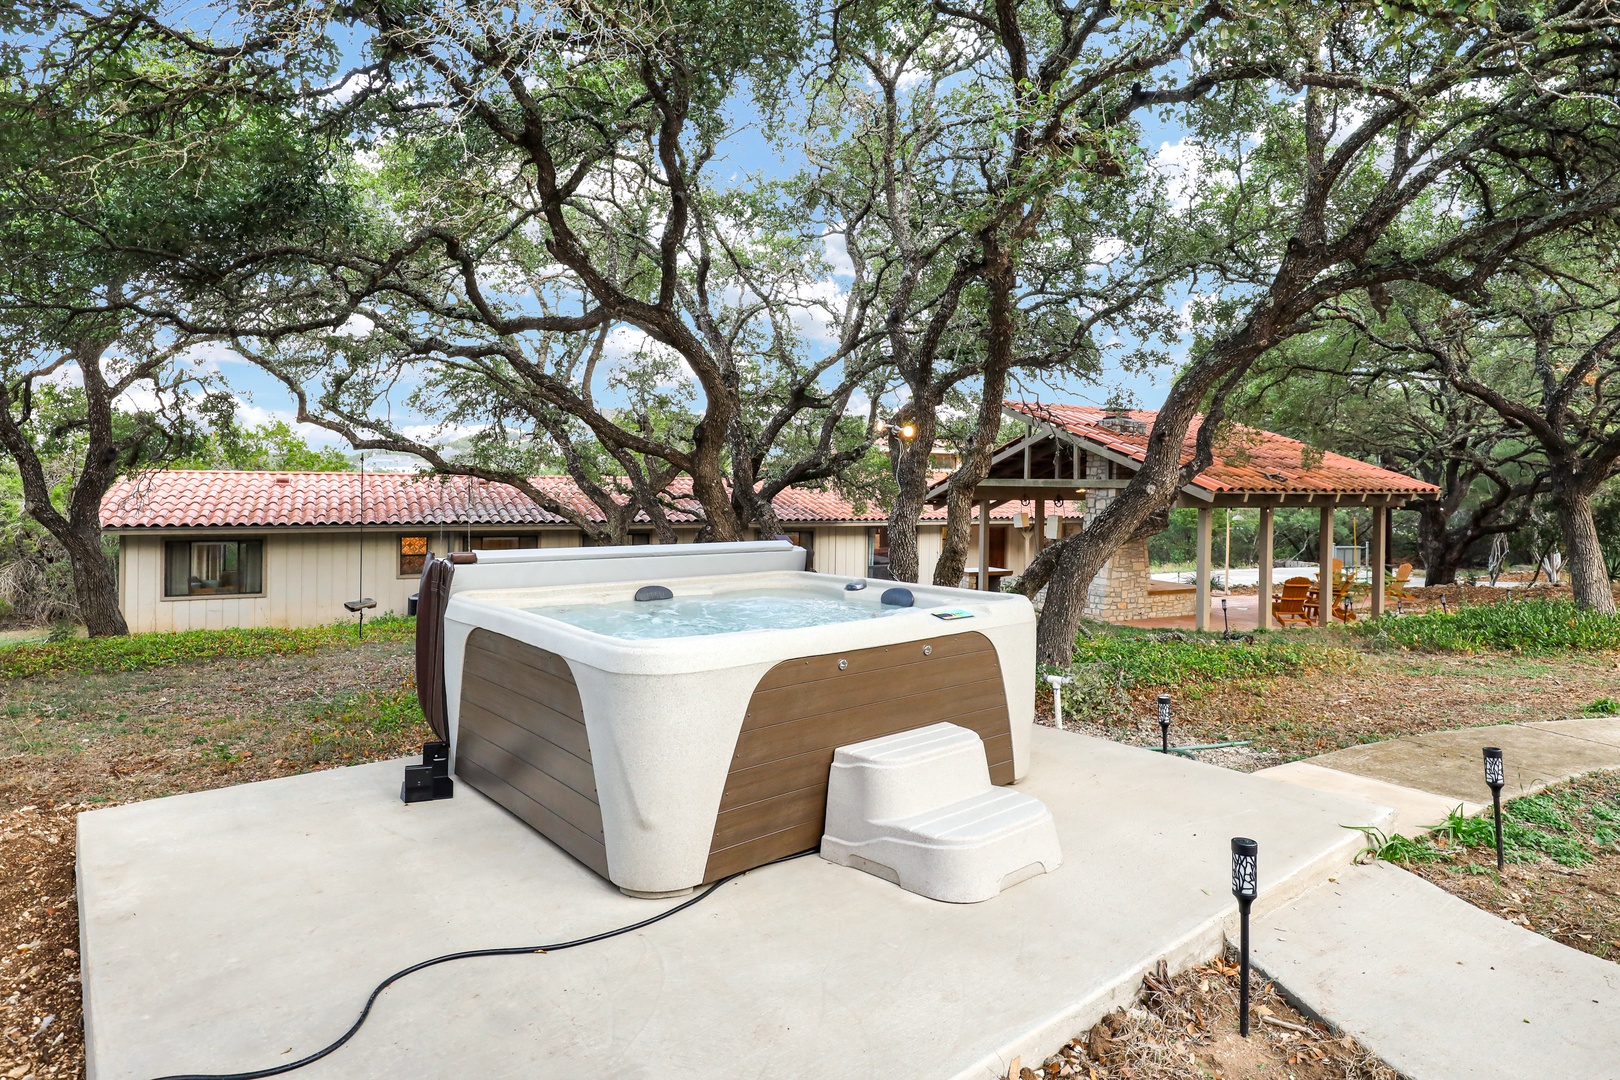 Soak your cares away in the bubbling private hot tub